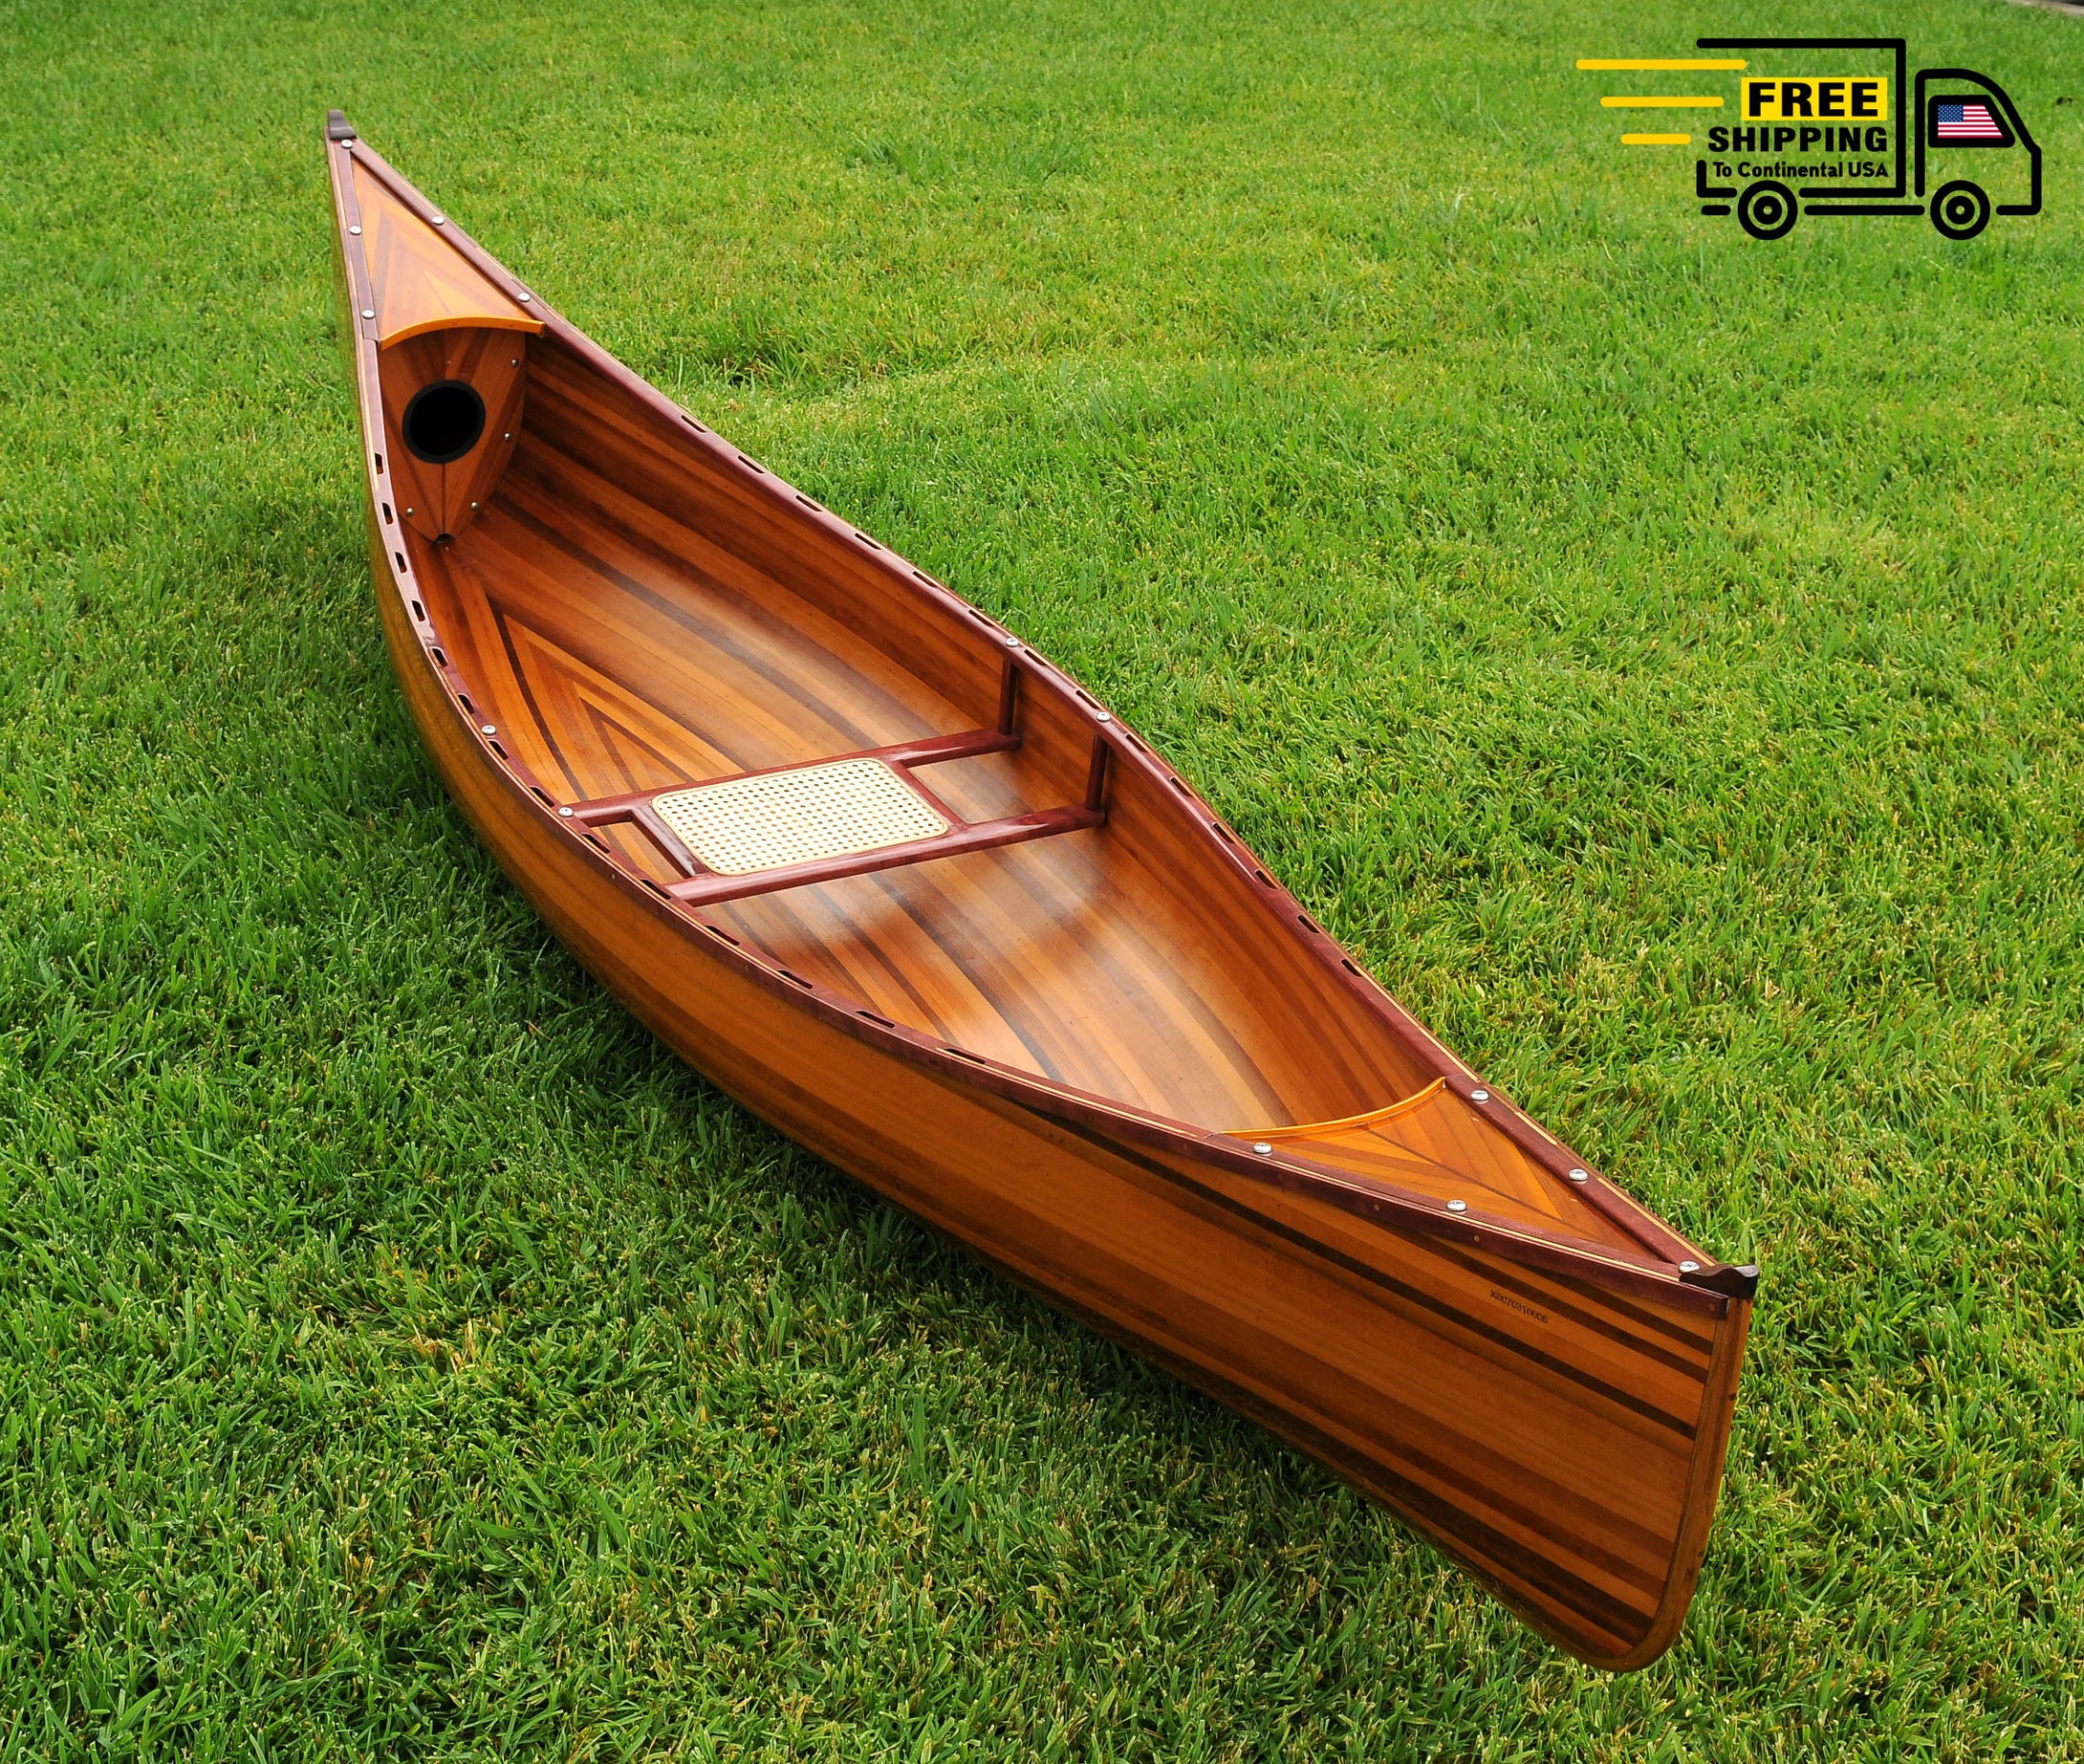 WOODEN CANOE 10 FT | Museum-quality | Fully Assembled Wooden Ship Model